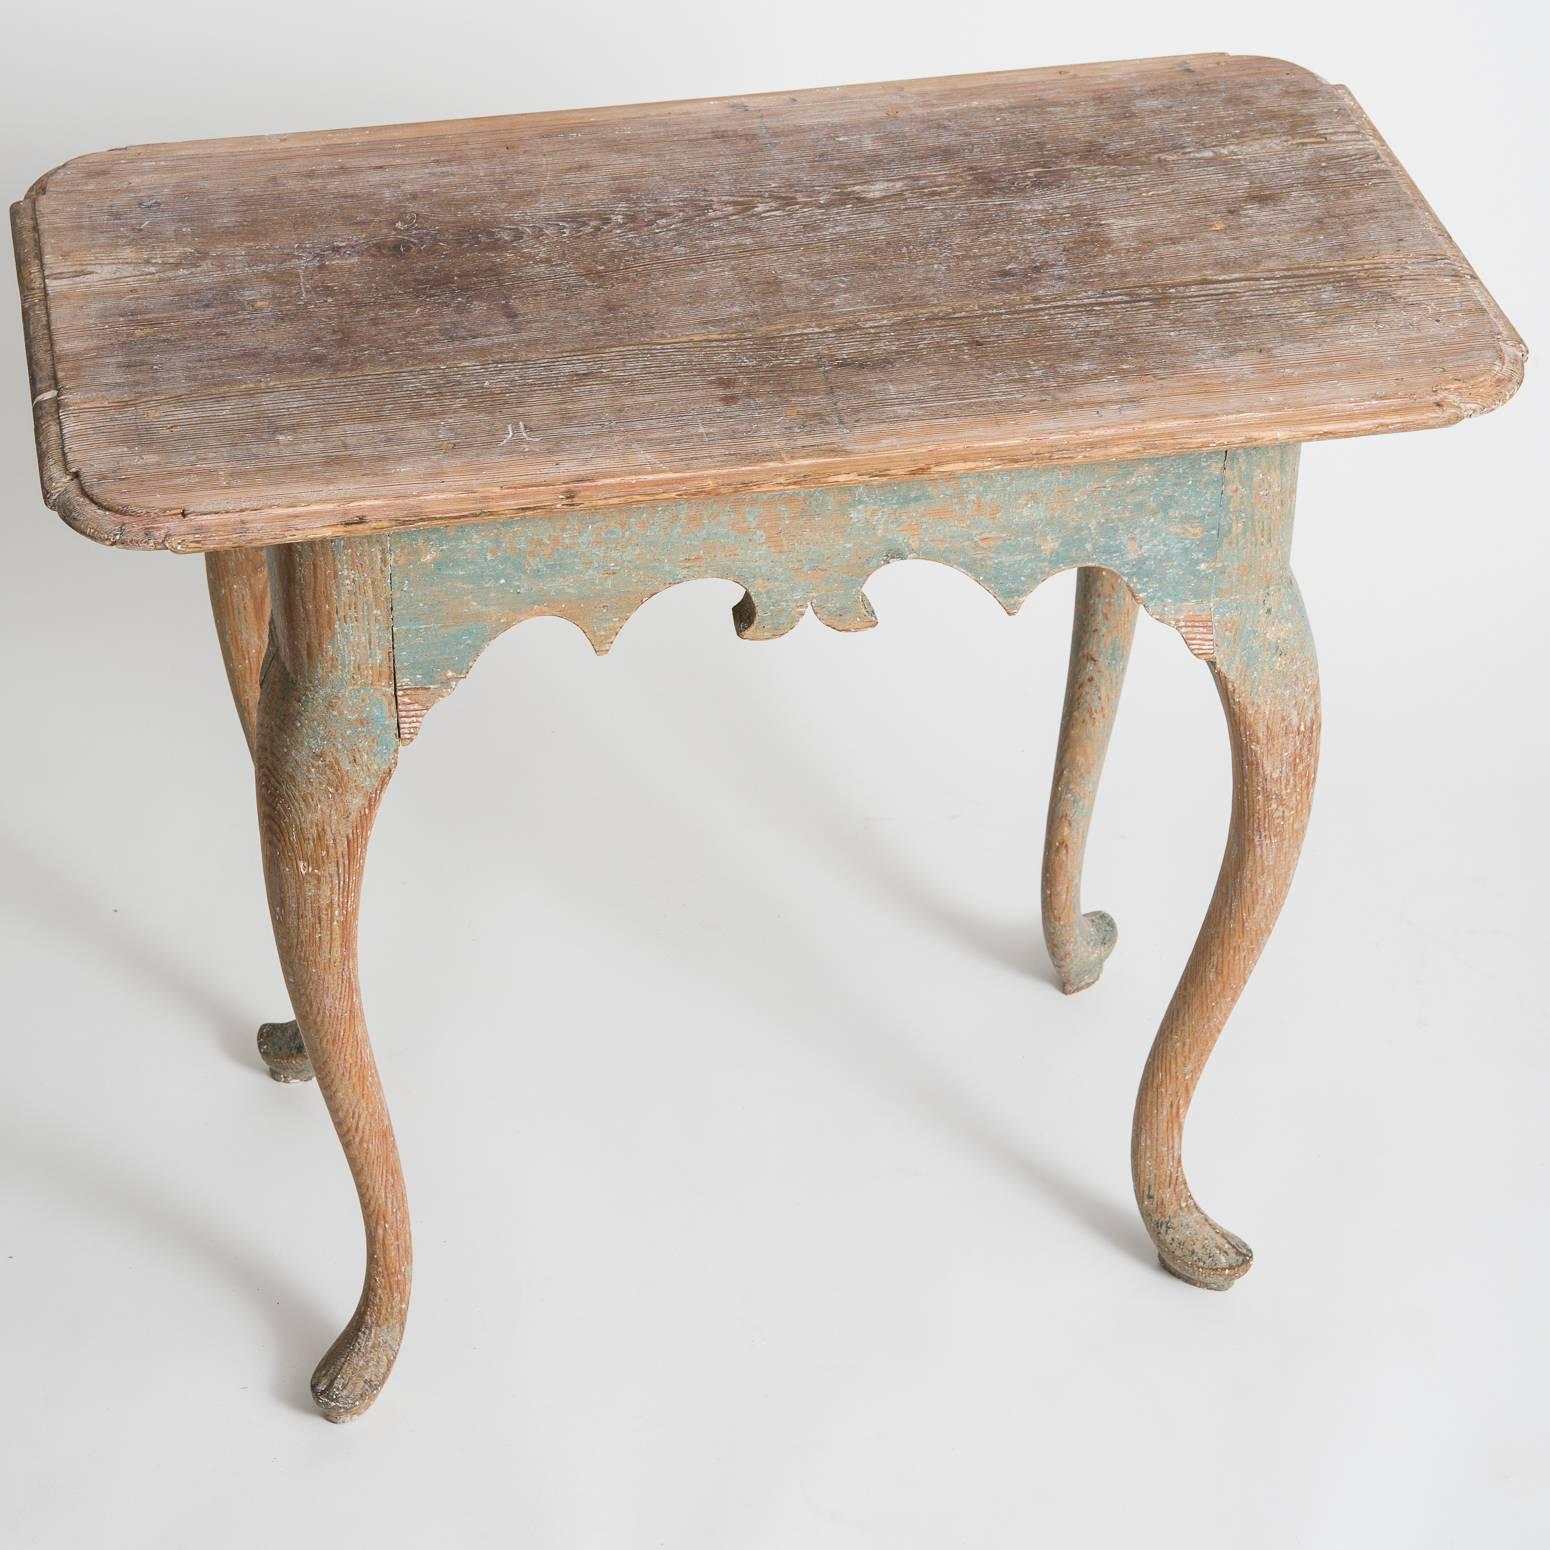 This table is a superb example of the Swedish Rococo style but in a country mood. The front apron has a charming folk inspired cut-out design that it’s repeated on each side. The back is finished simply with no cut-outs. The curved legs end in pad